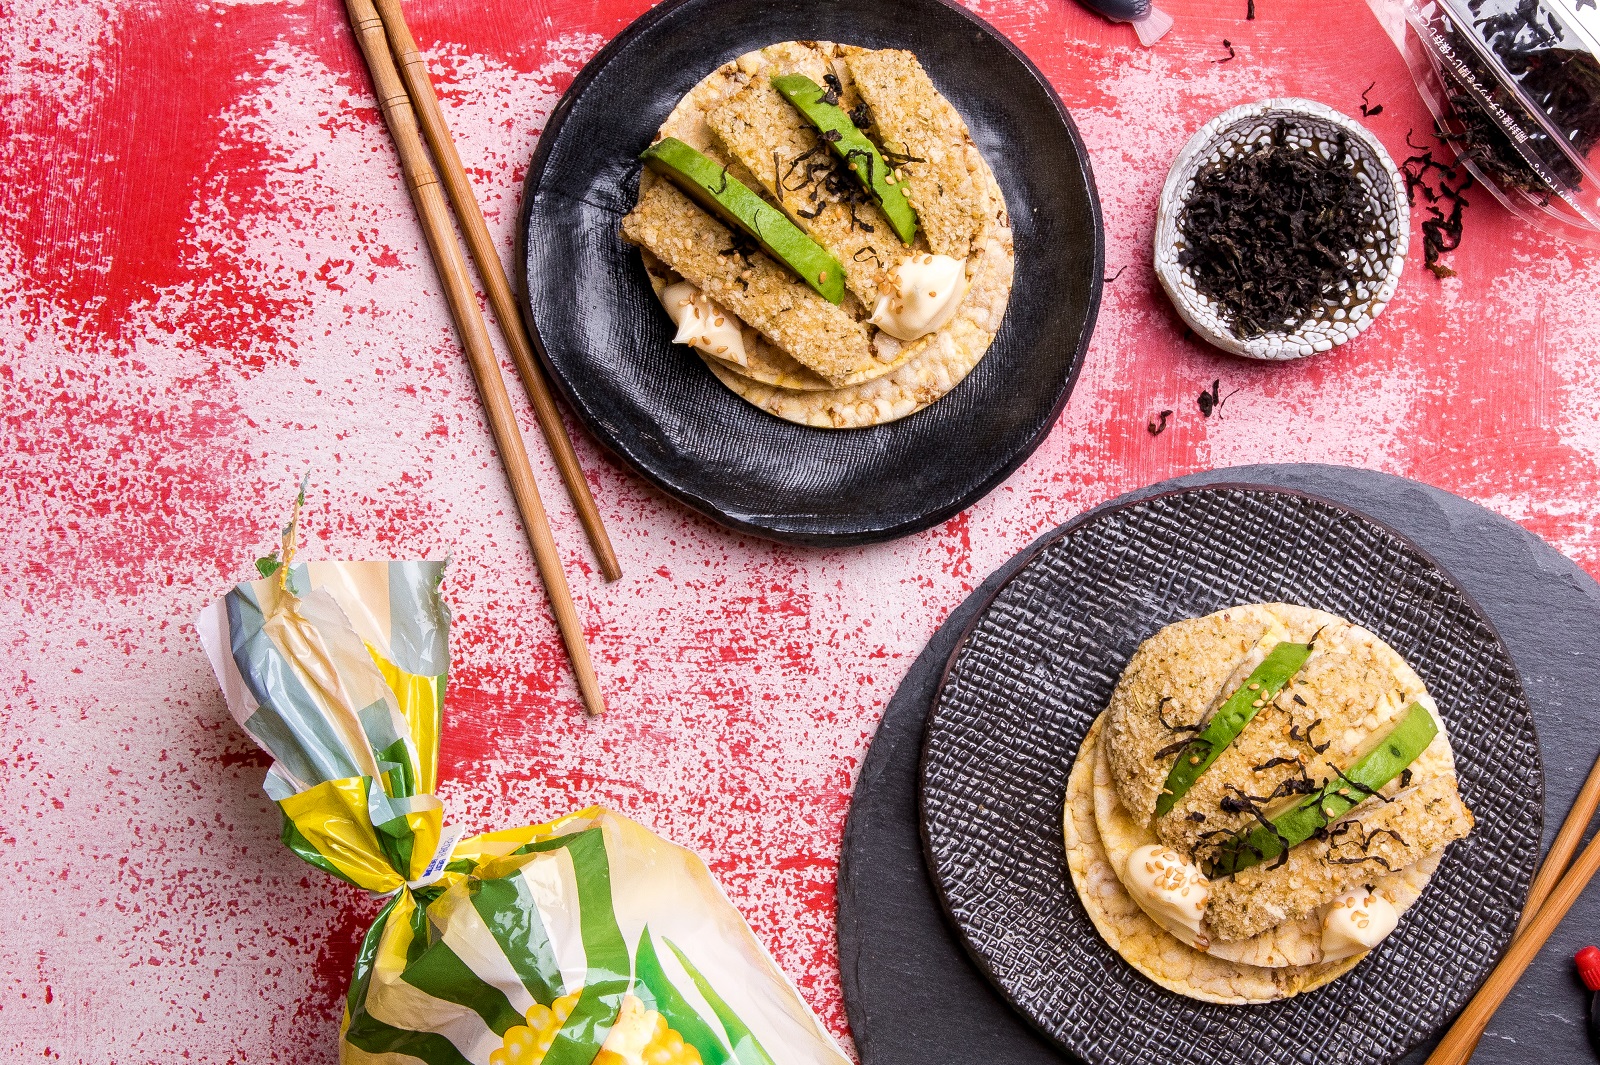 Lunch Recipe of CORN THINS slices with Chicken Schnitzel, Avo, Kewpie Mayo & Seaweed Flakes